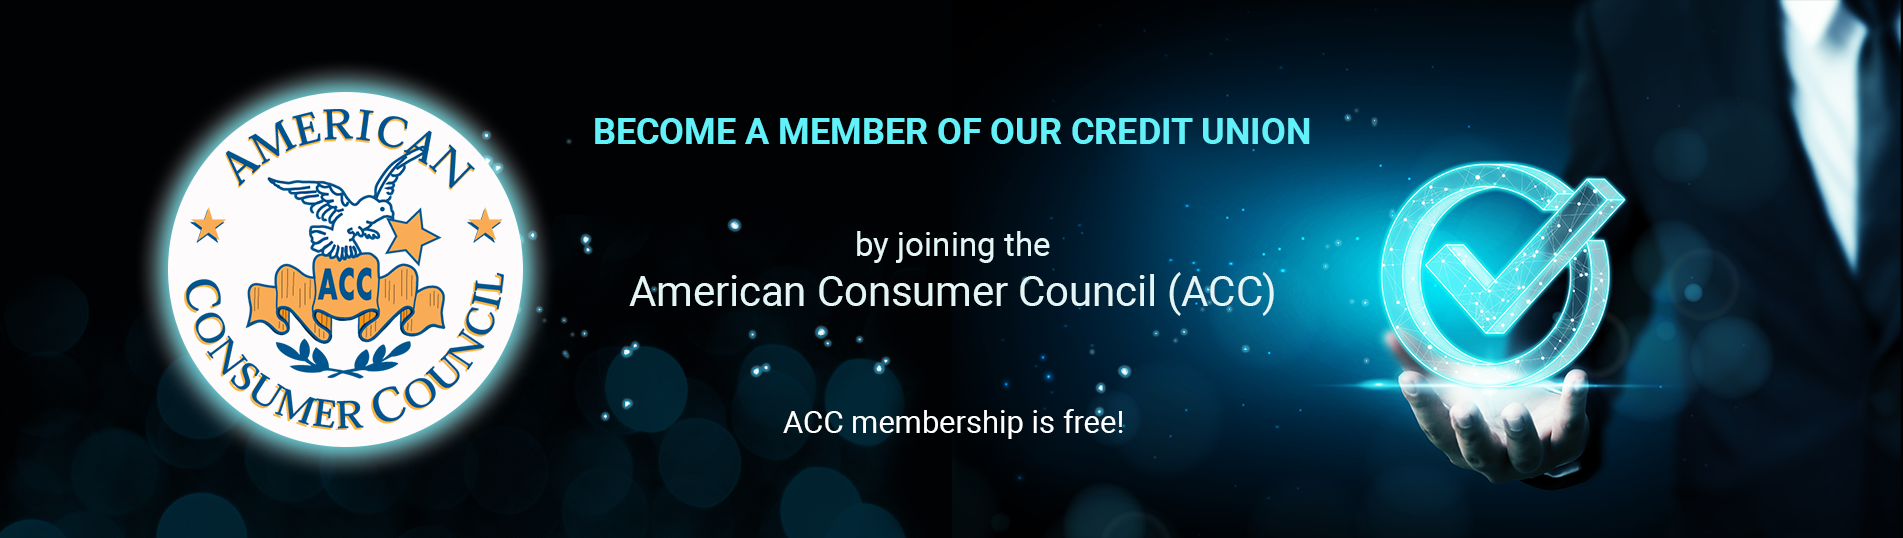 Share the Savings! You can now refer your friends to join Parsons Federal Credit Union through our partnership with the American Consumer Council.